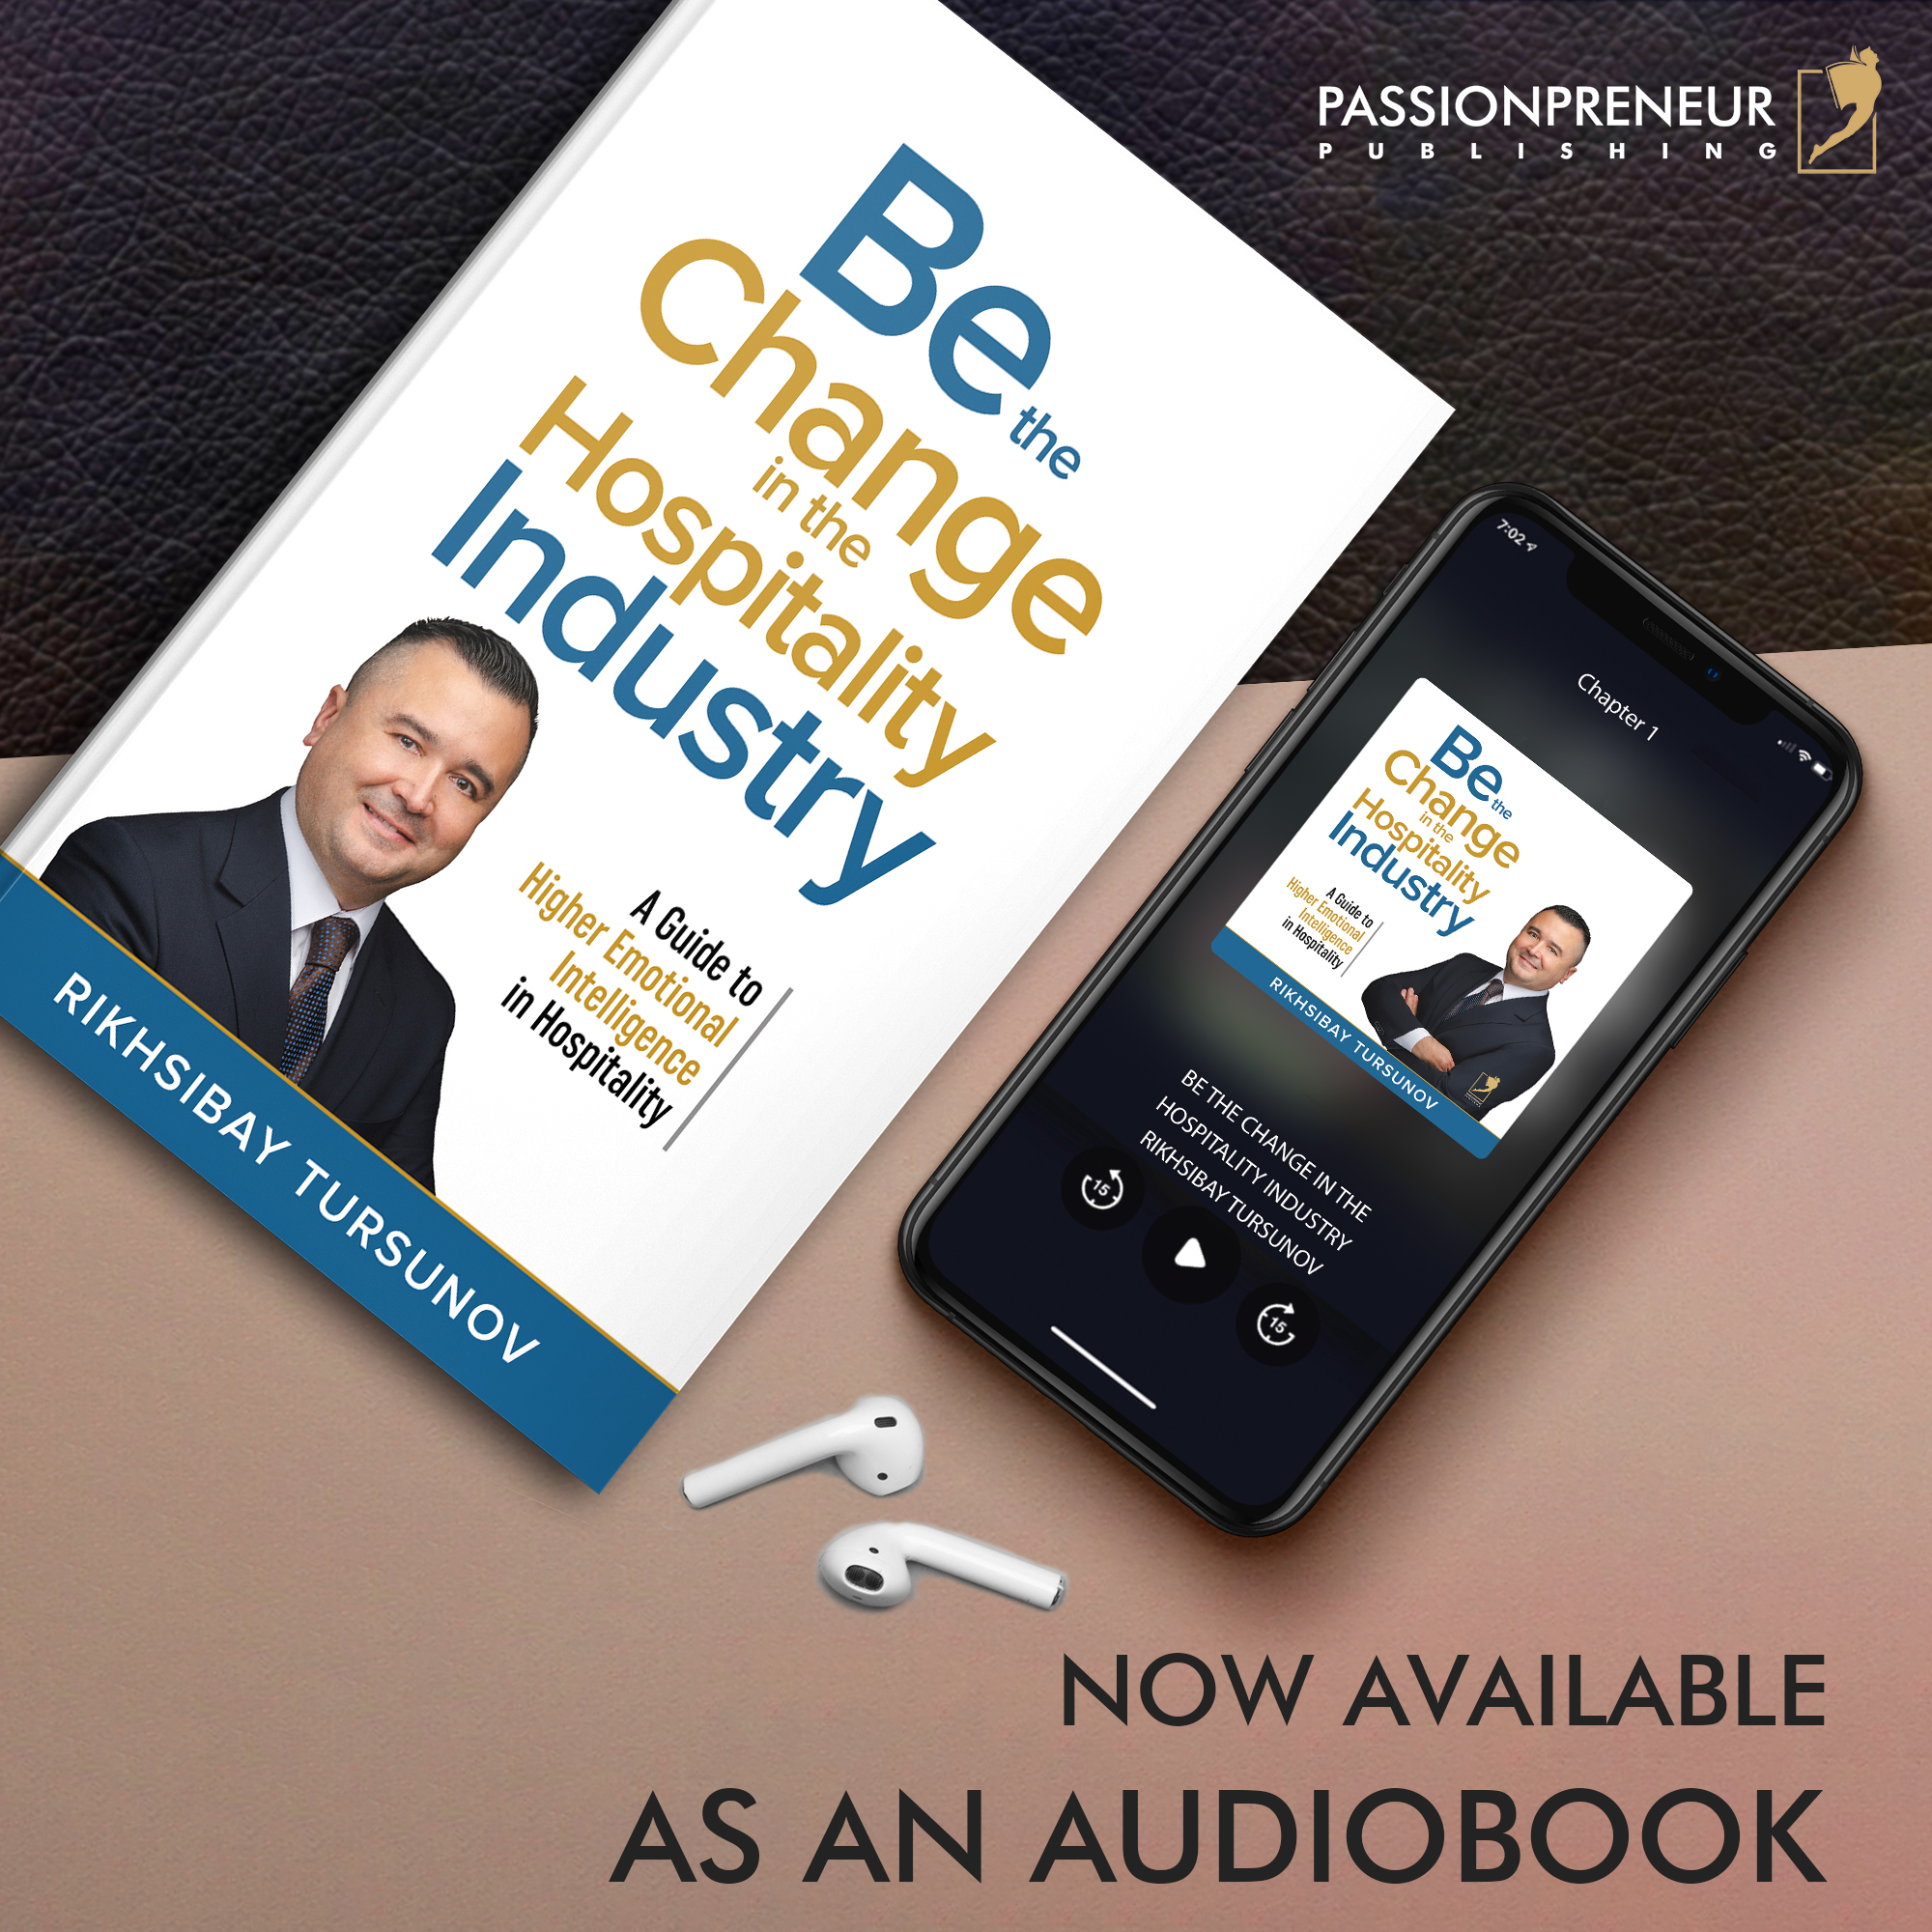 Now Available as an Audiobook